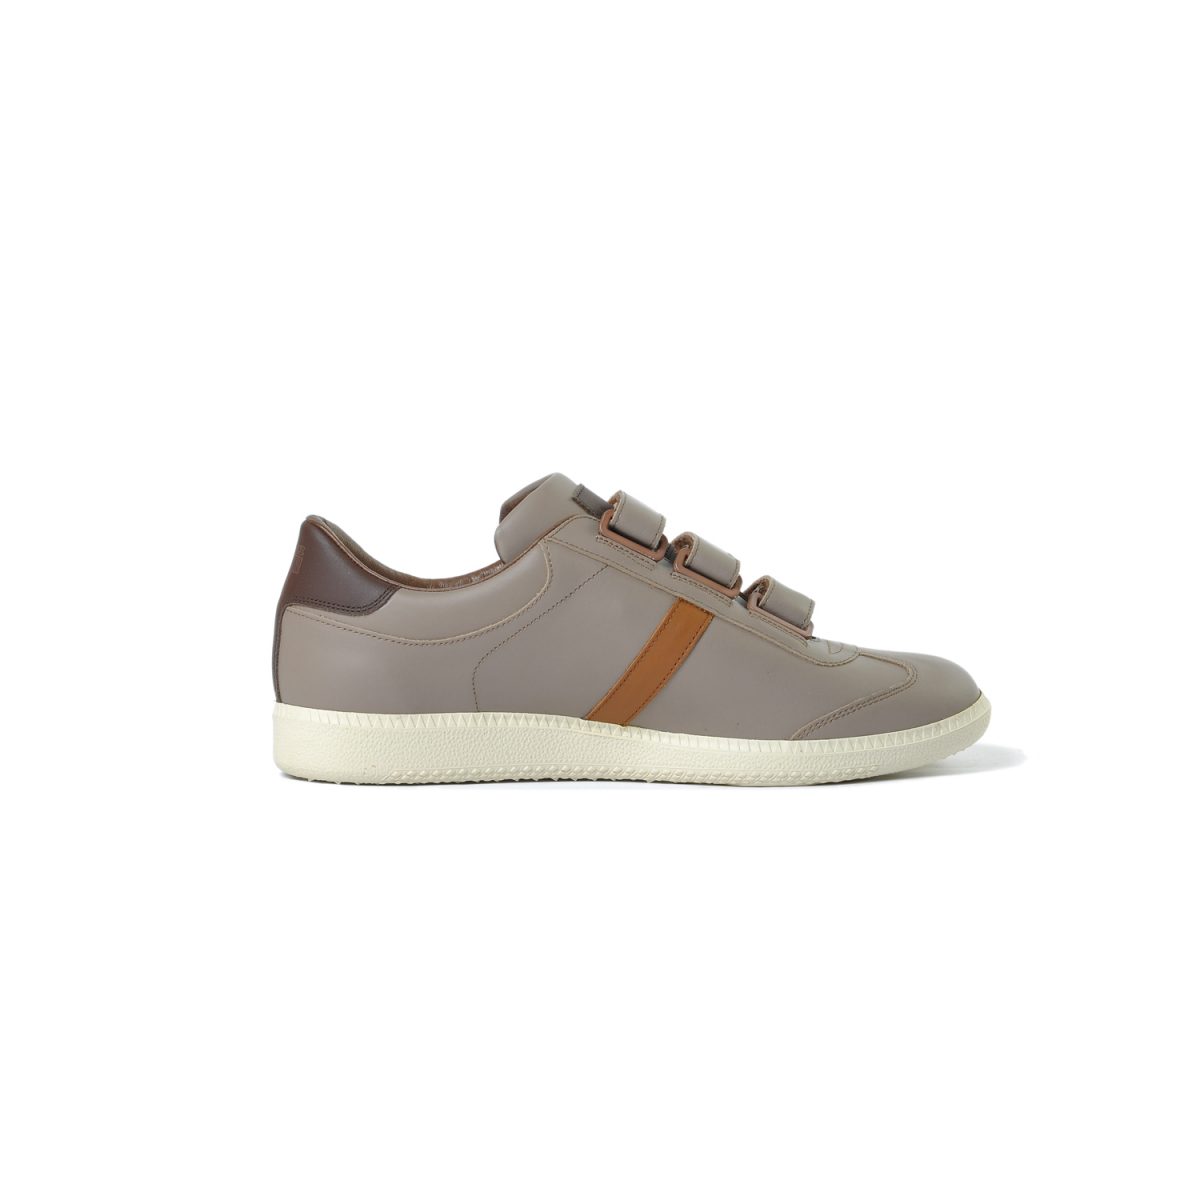 Tisza shoes - Compakt Delux - Earth-3brown